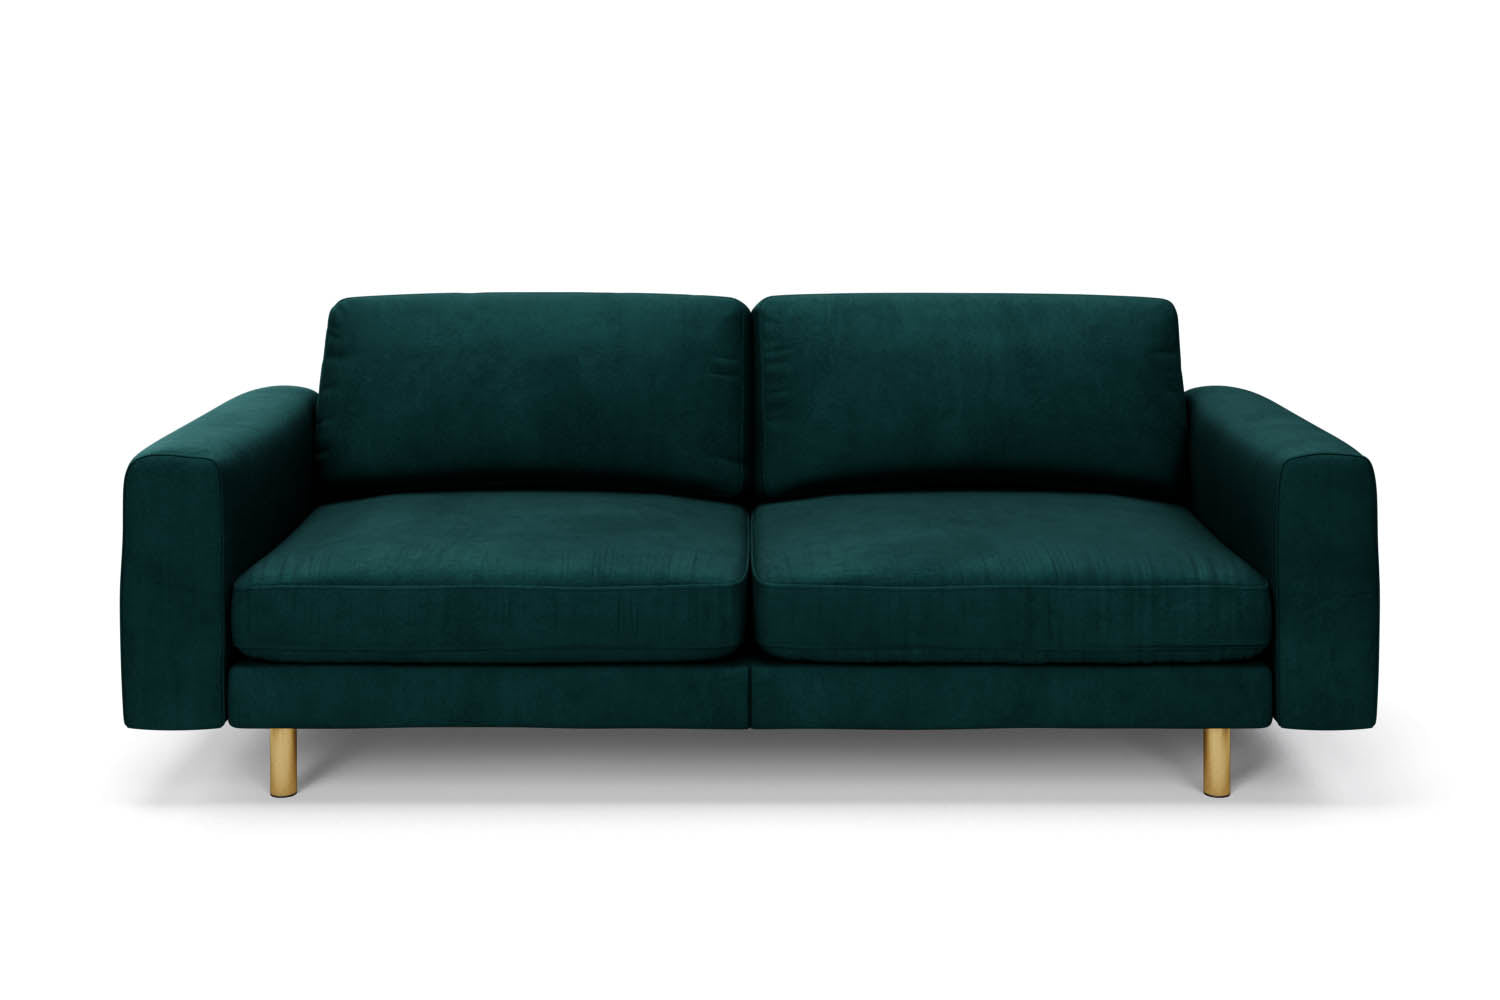 SNUG | The Big Chill 3 Seater Sofa in Pine Green variant_40837199069232